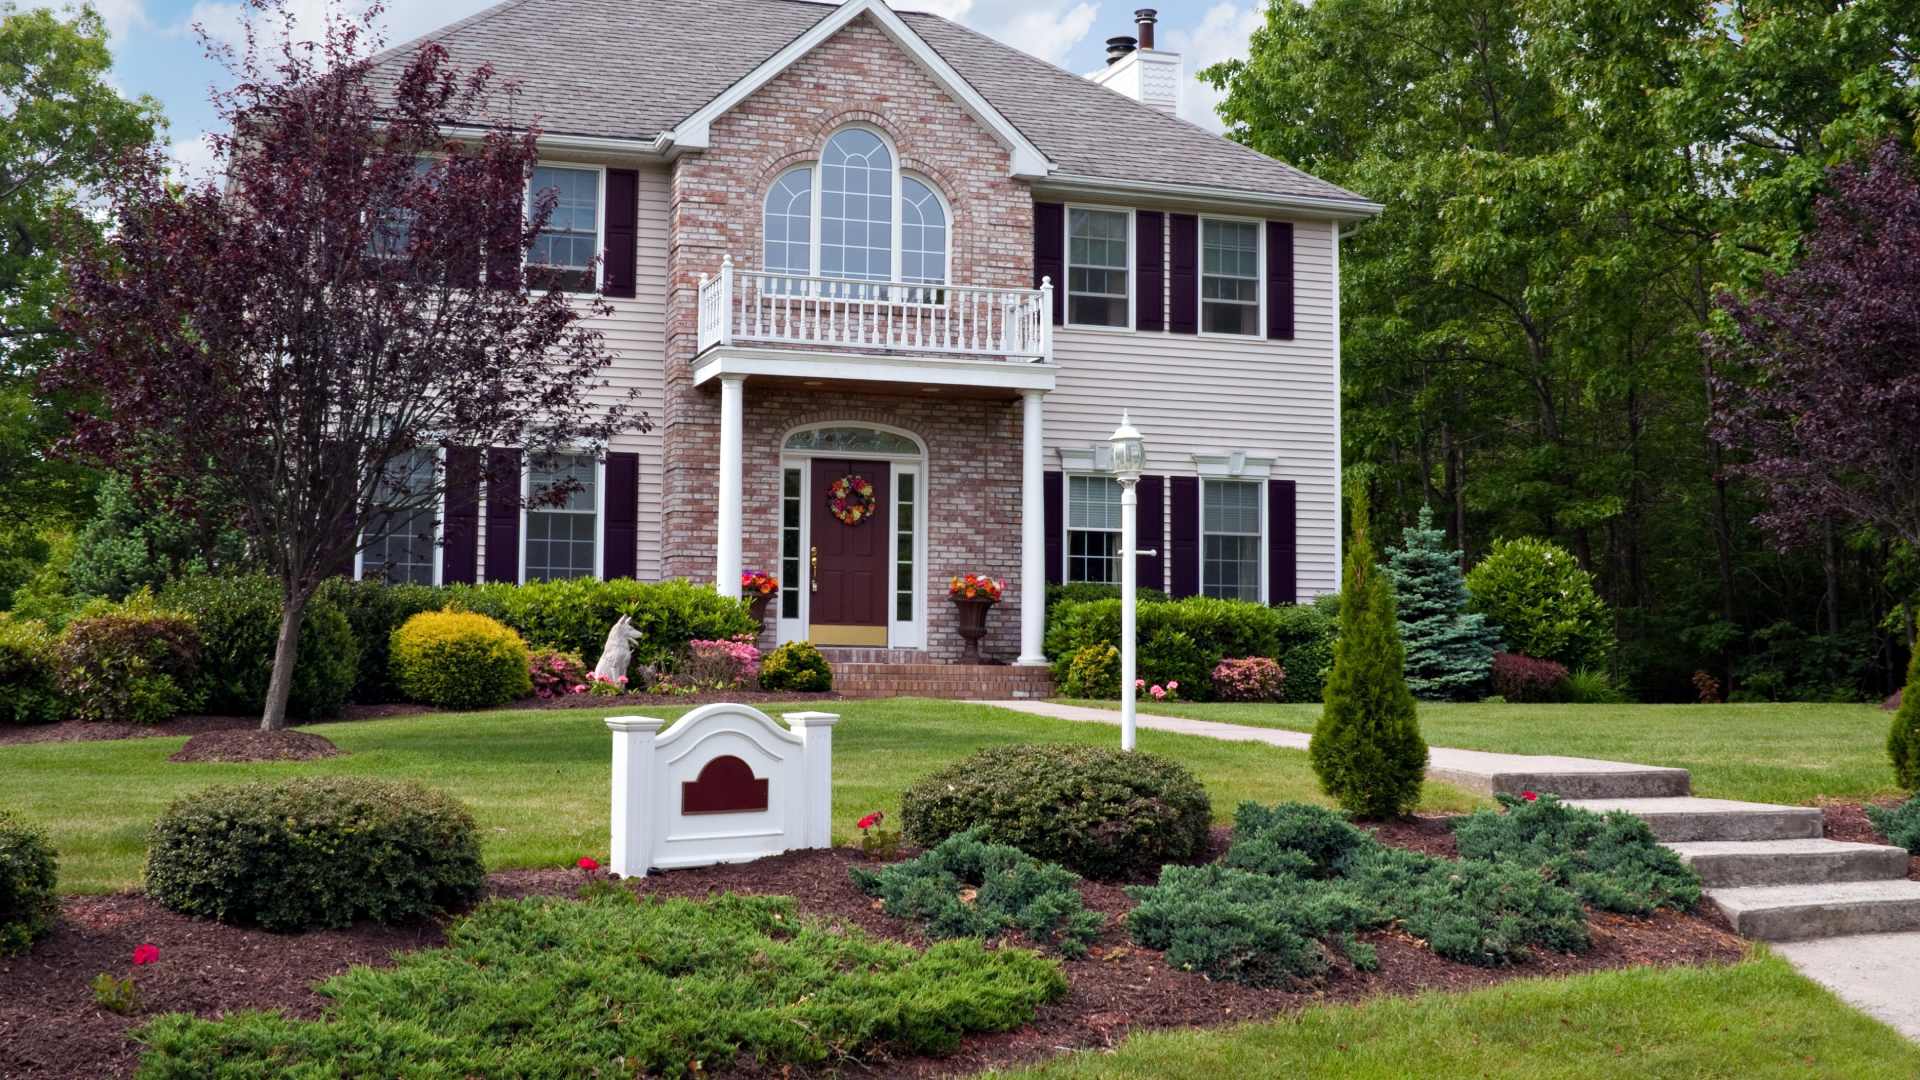 Want to Turn the Curb Appeal of Your Property From Drab to Fab? Here’s How!